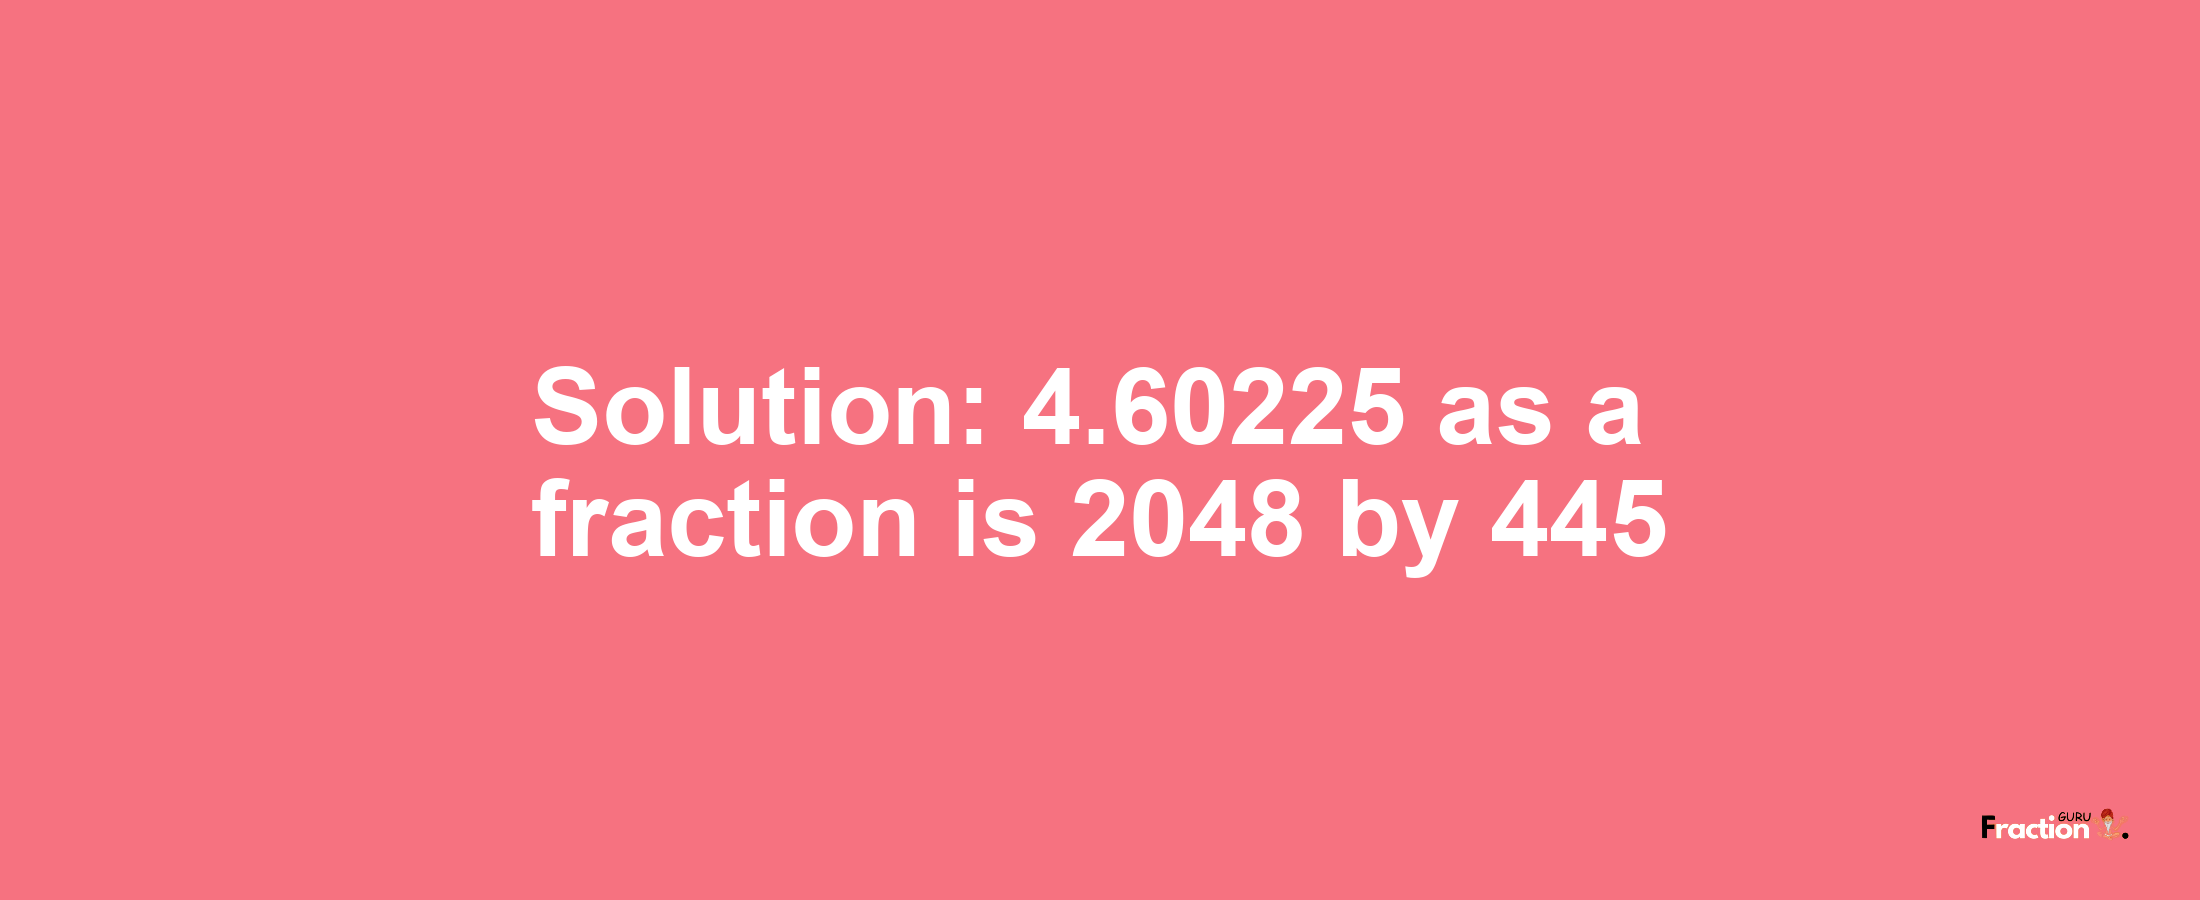 Solution:4.60225 as a fraction is 2048/445